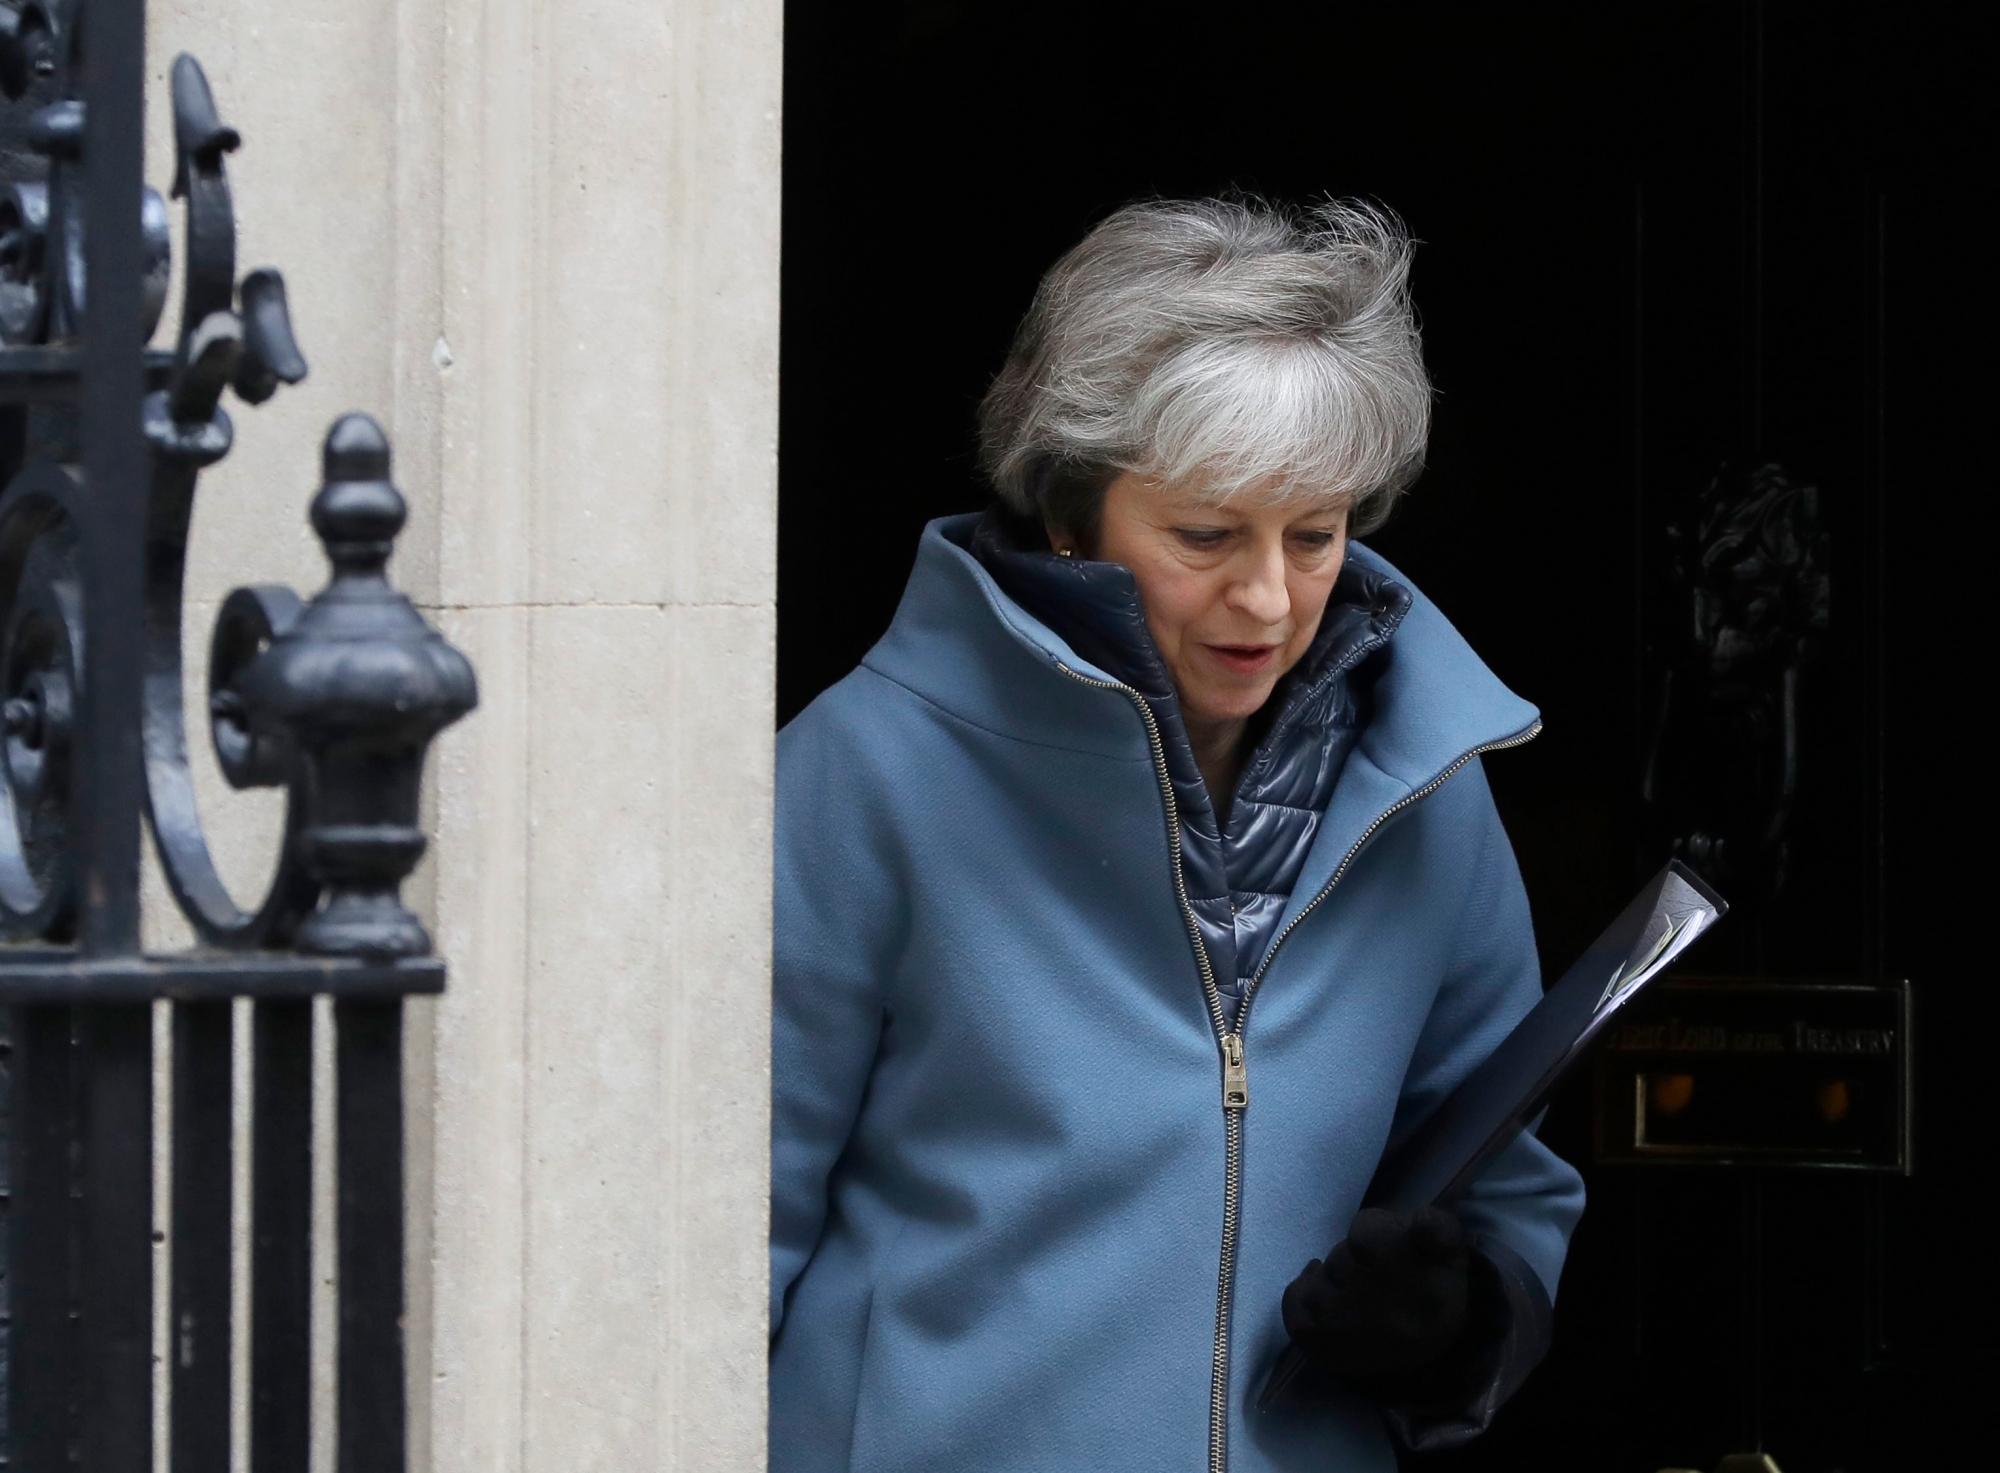 Britain's Prime Minister Theresa May leaves 10 Downing Street in London, Tuesday, Feb. 12, 2019. May is expected to address Parliament on Brexit later Tuesday, followed by a debate. (AP Photo/Kirsty Wigglesworth) Britain Brexit